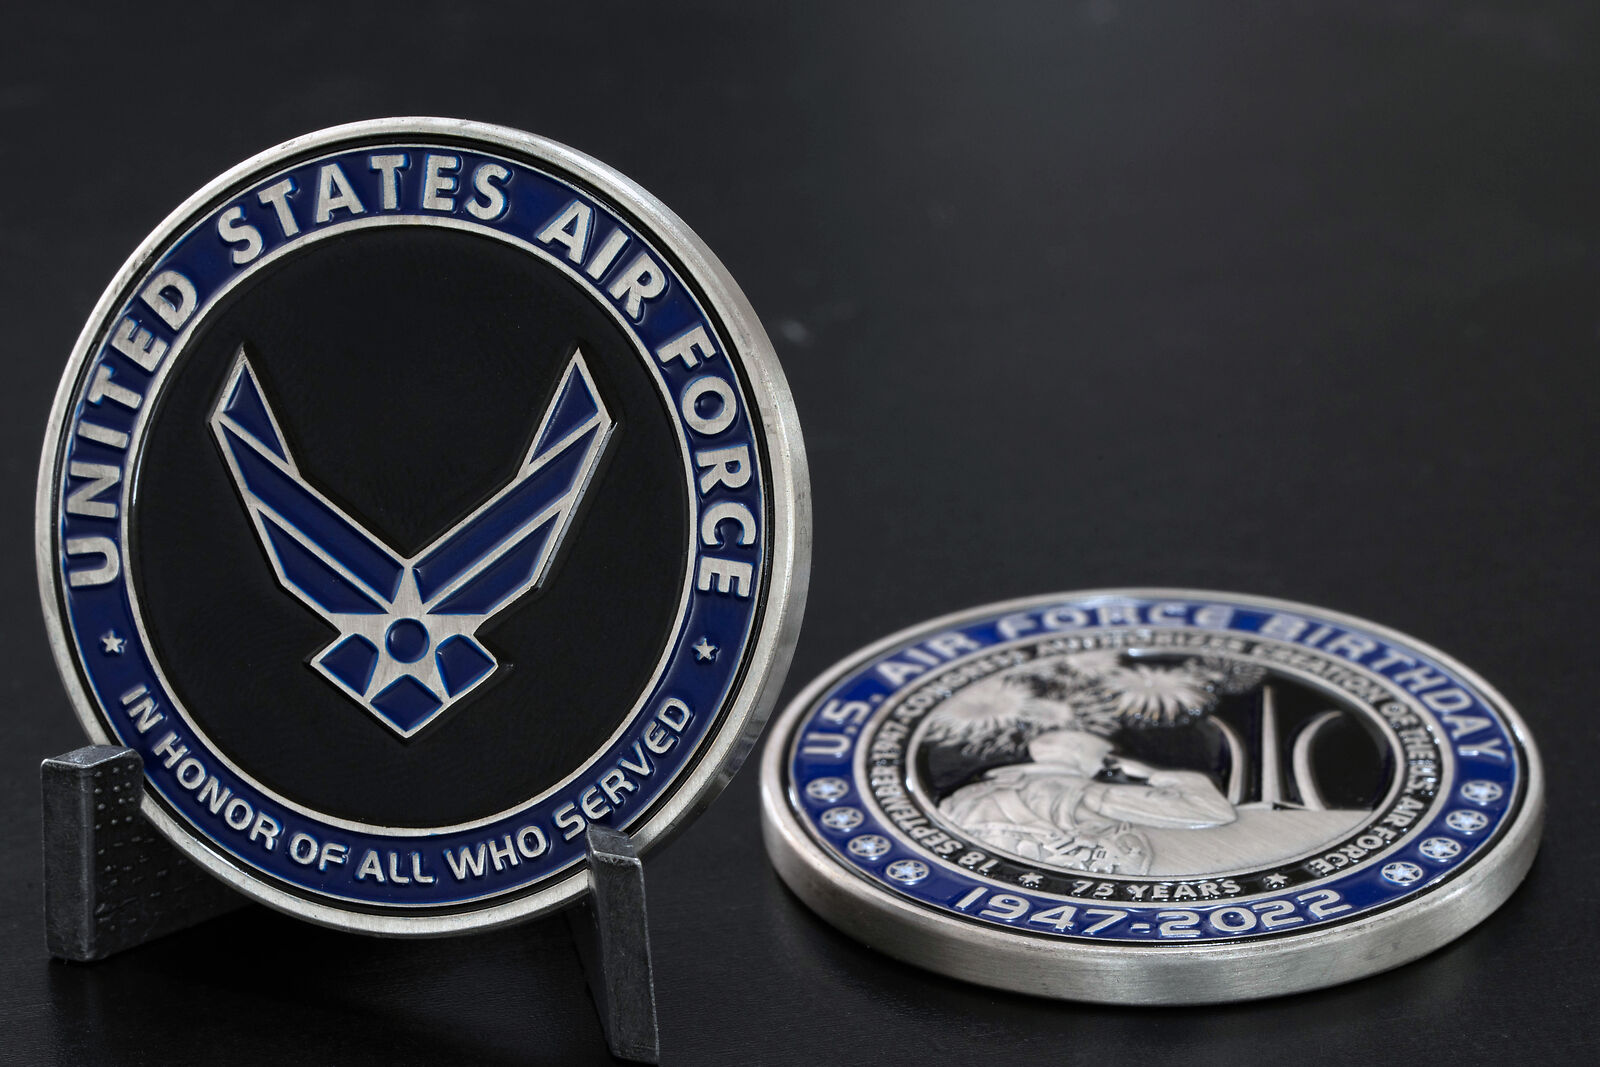 2022 United States Air Force Birthday Challenge coin